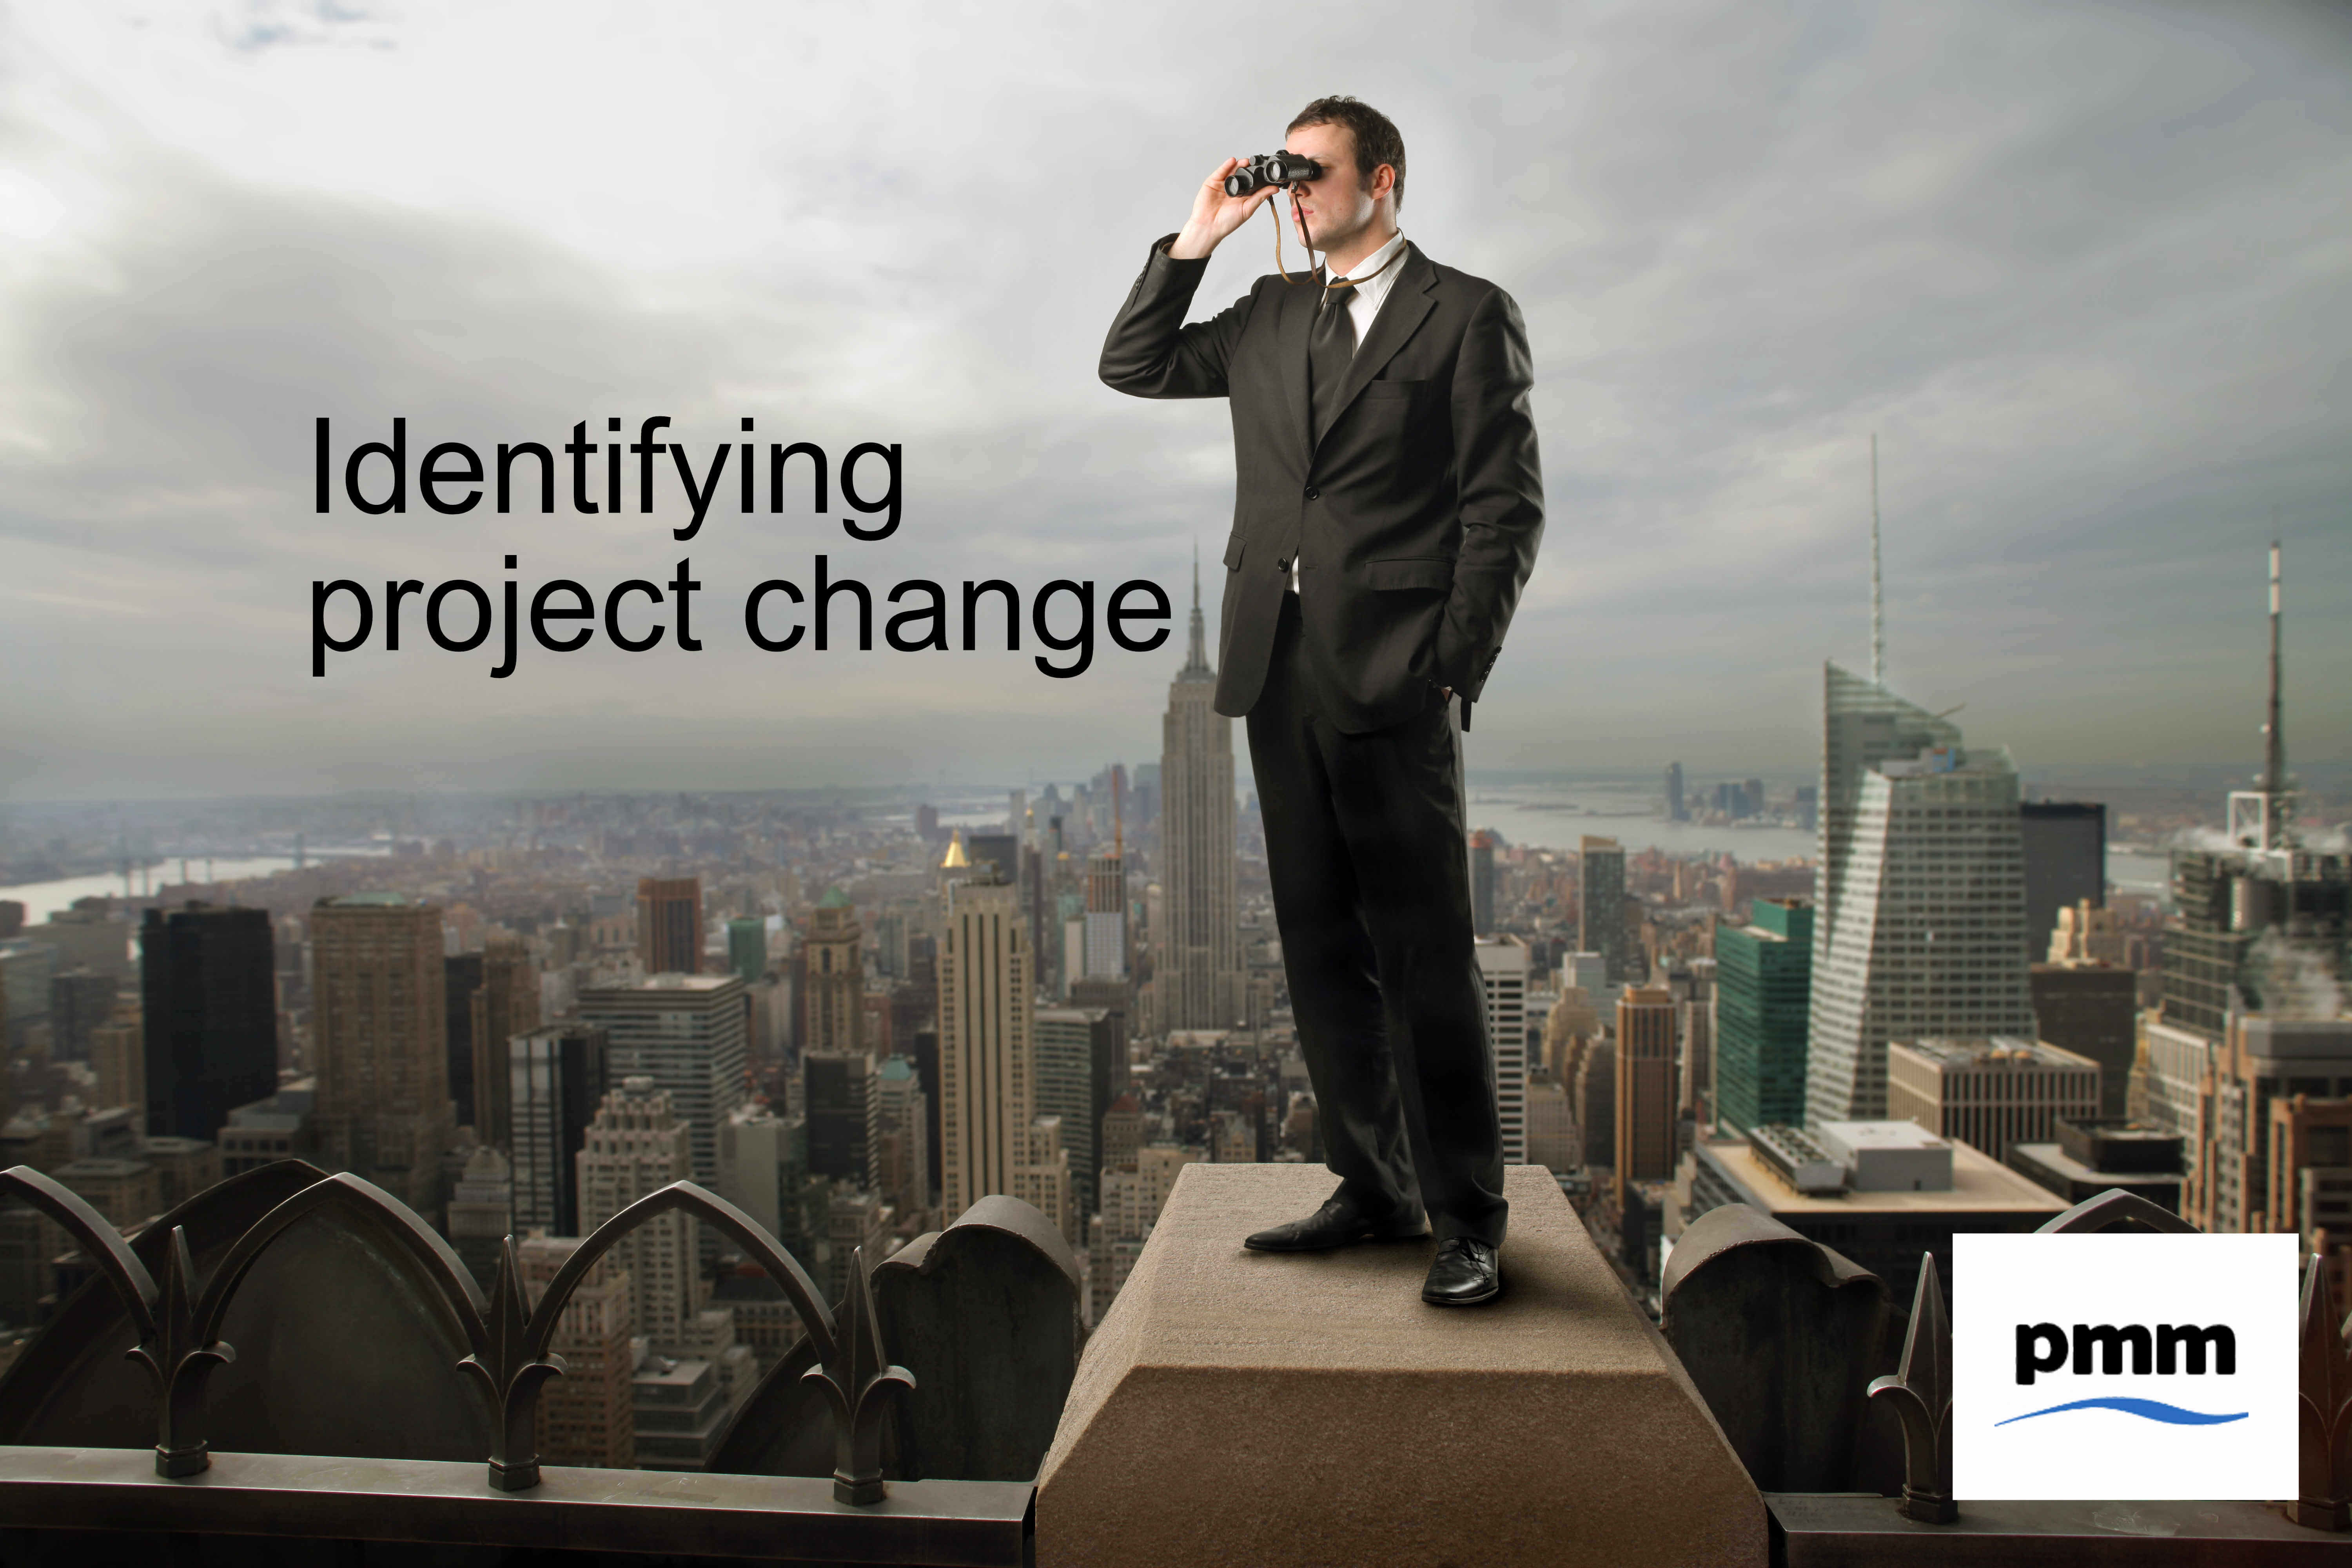 Scanning for project change